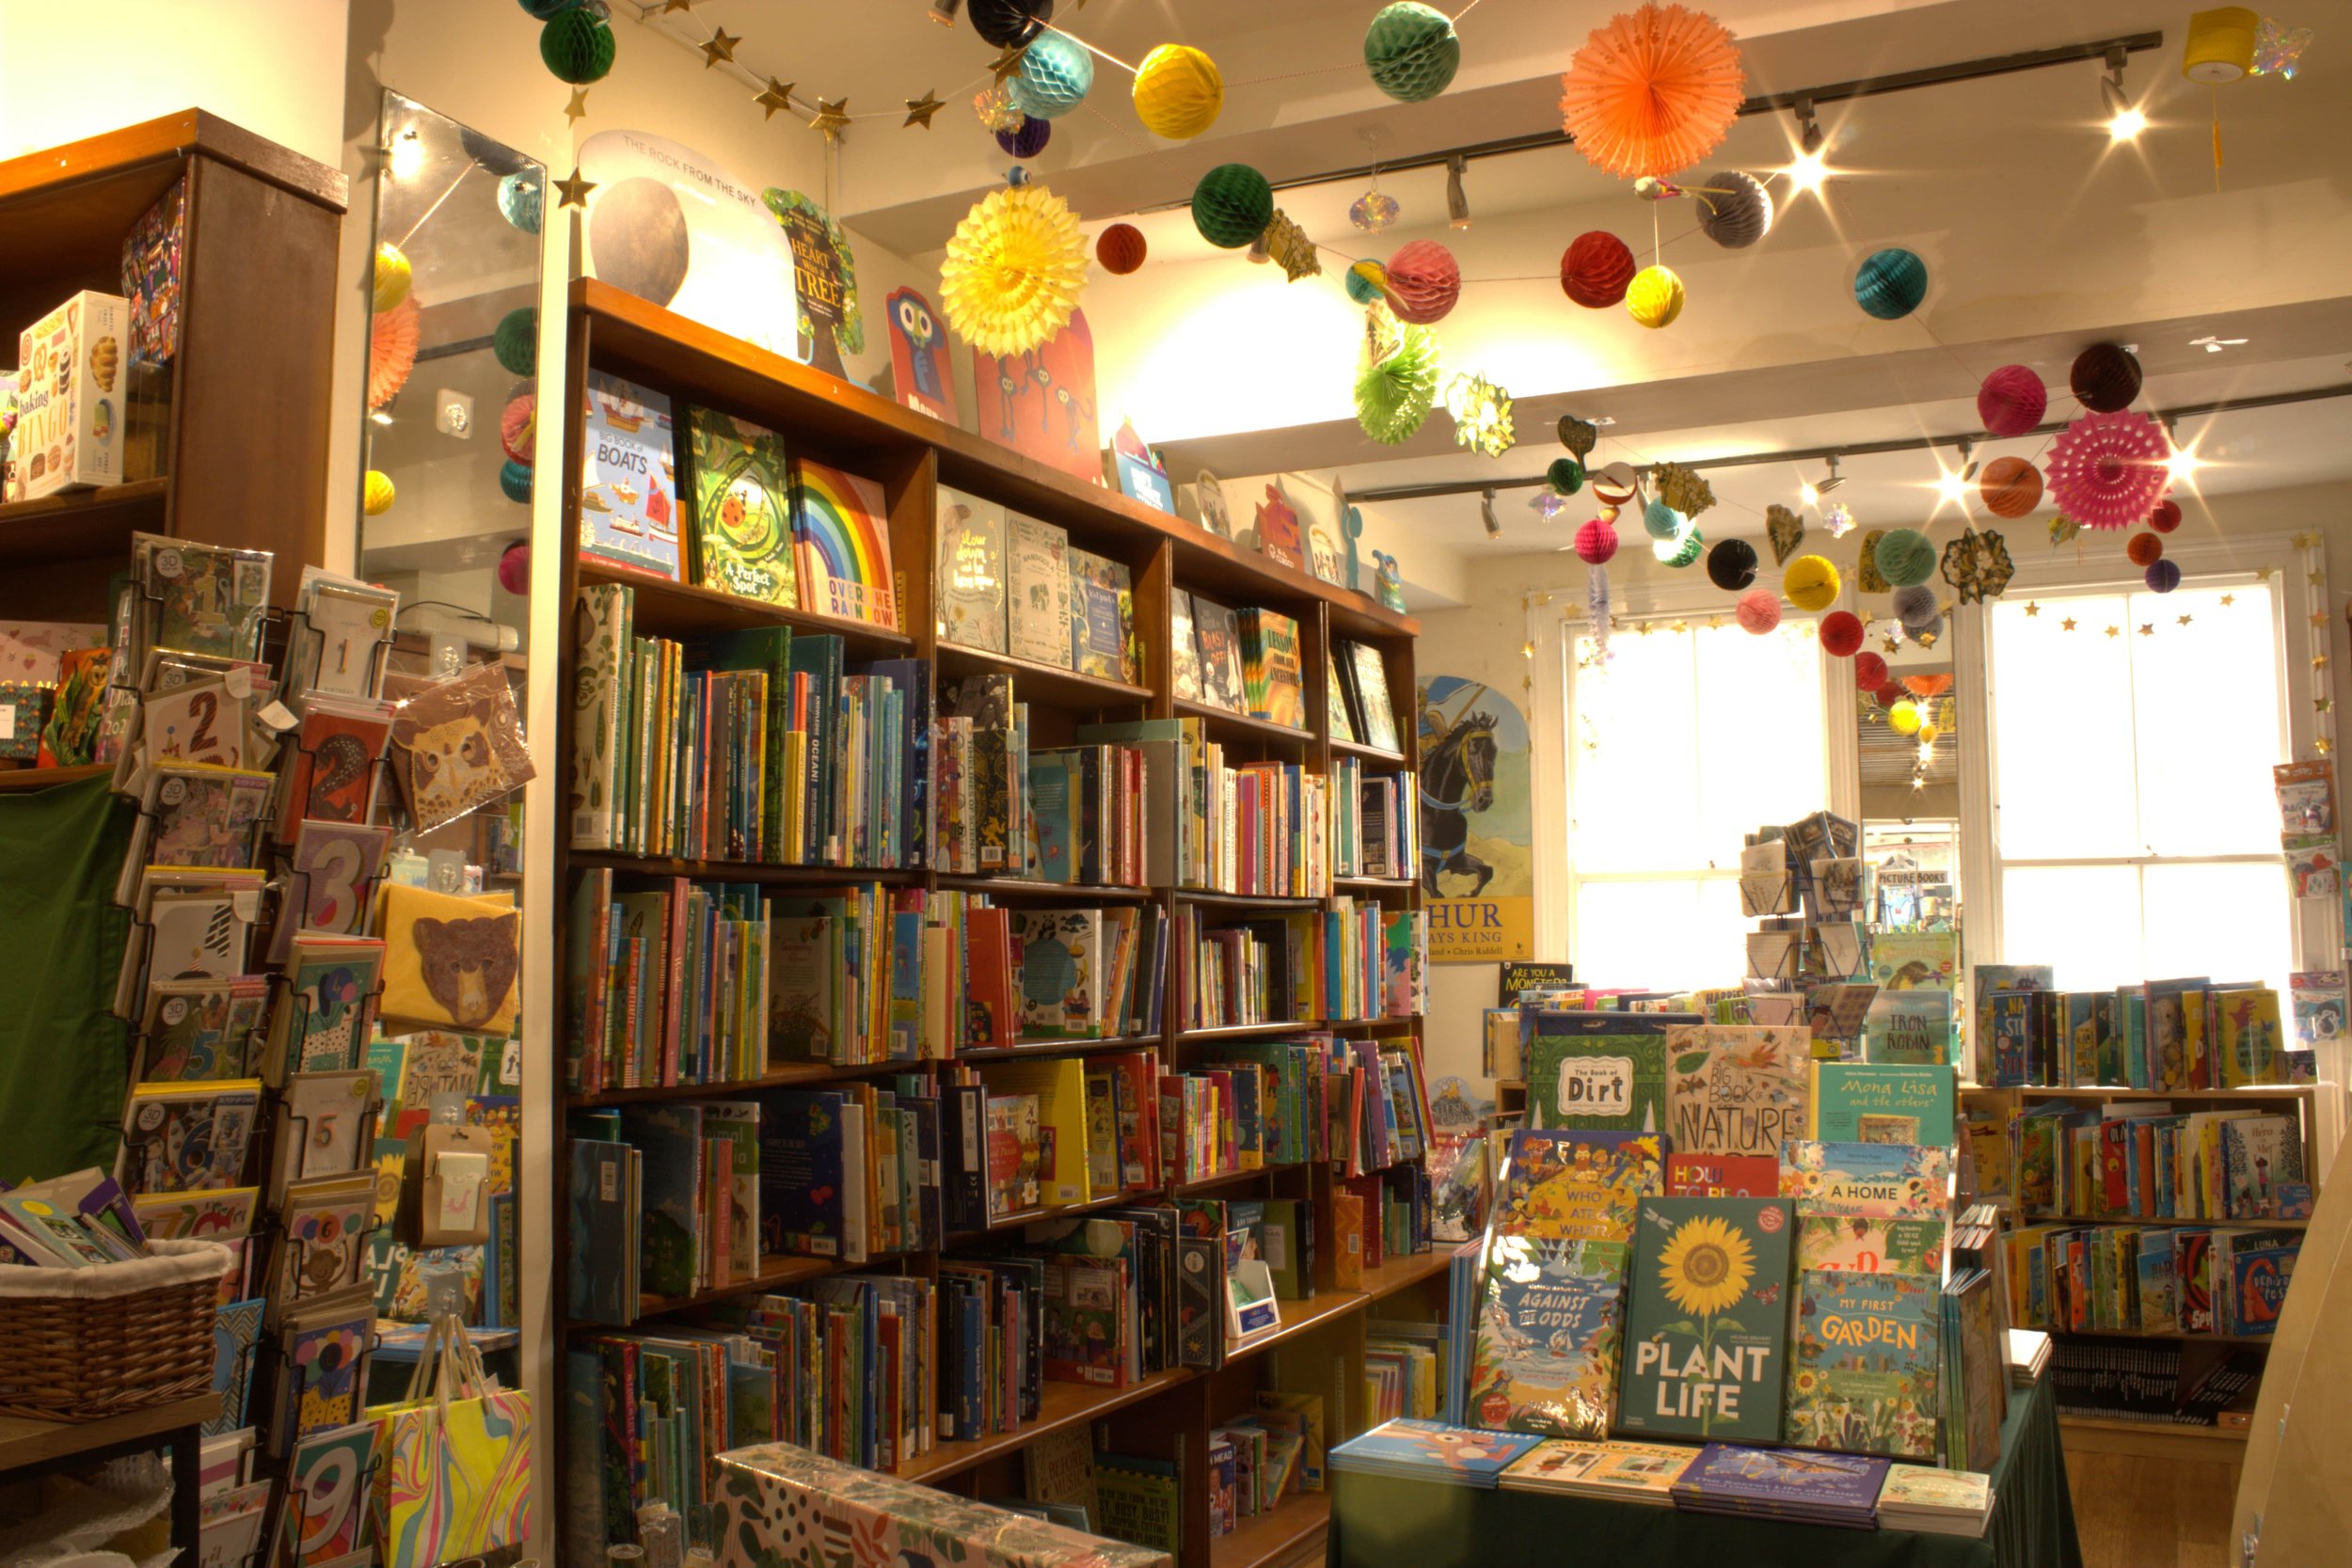 A look inside West End Lane Books